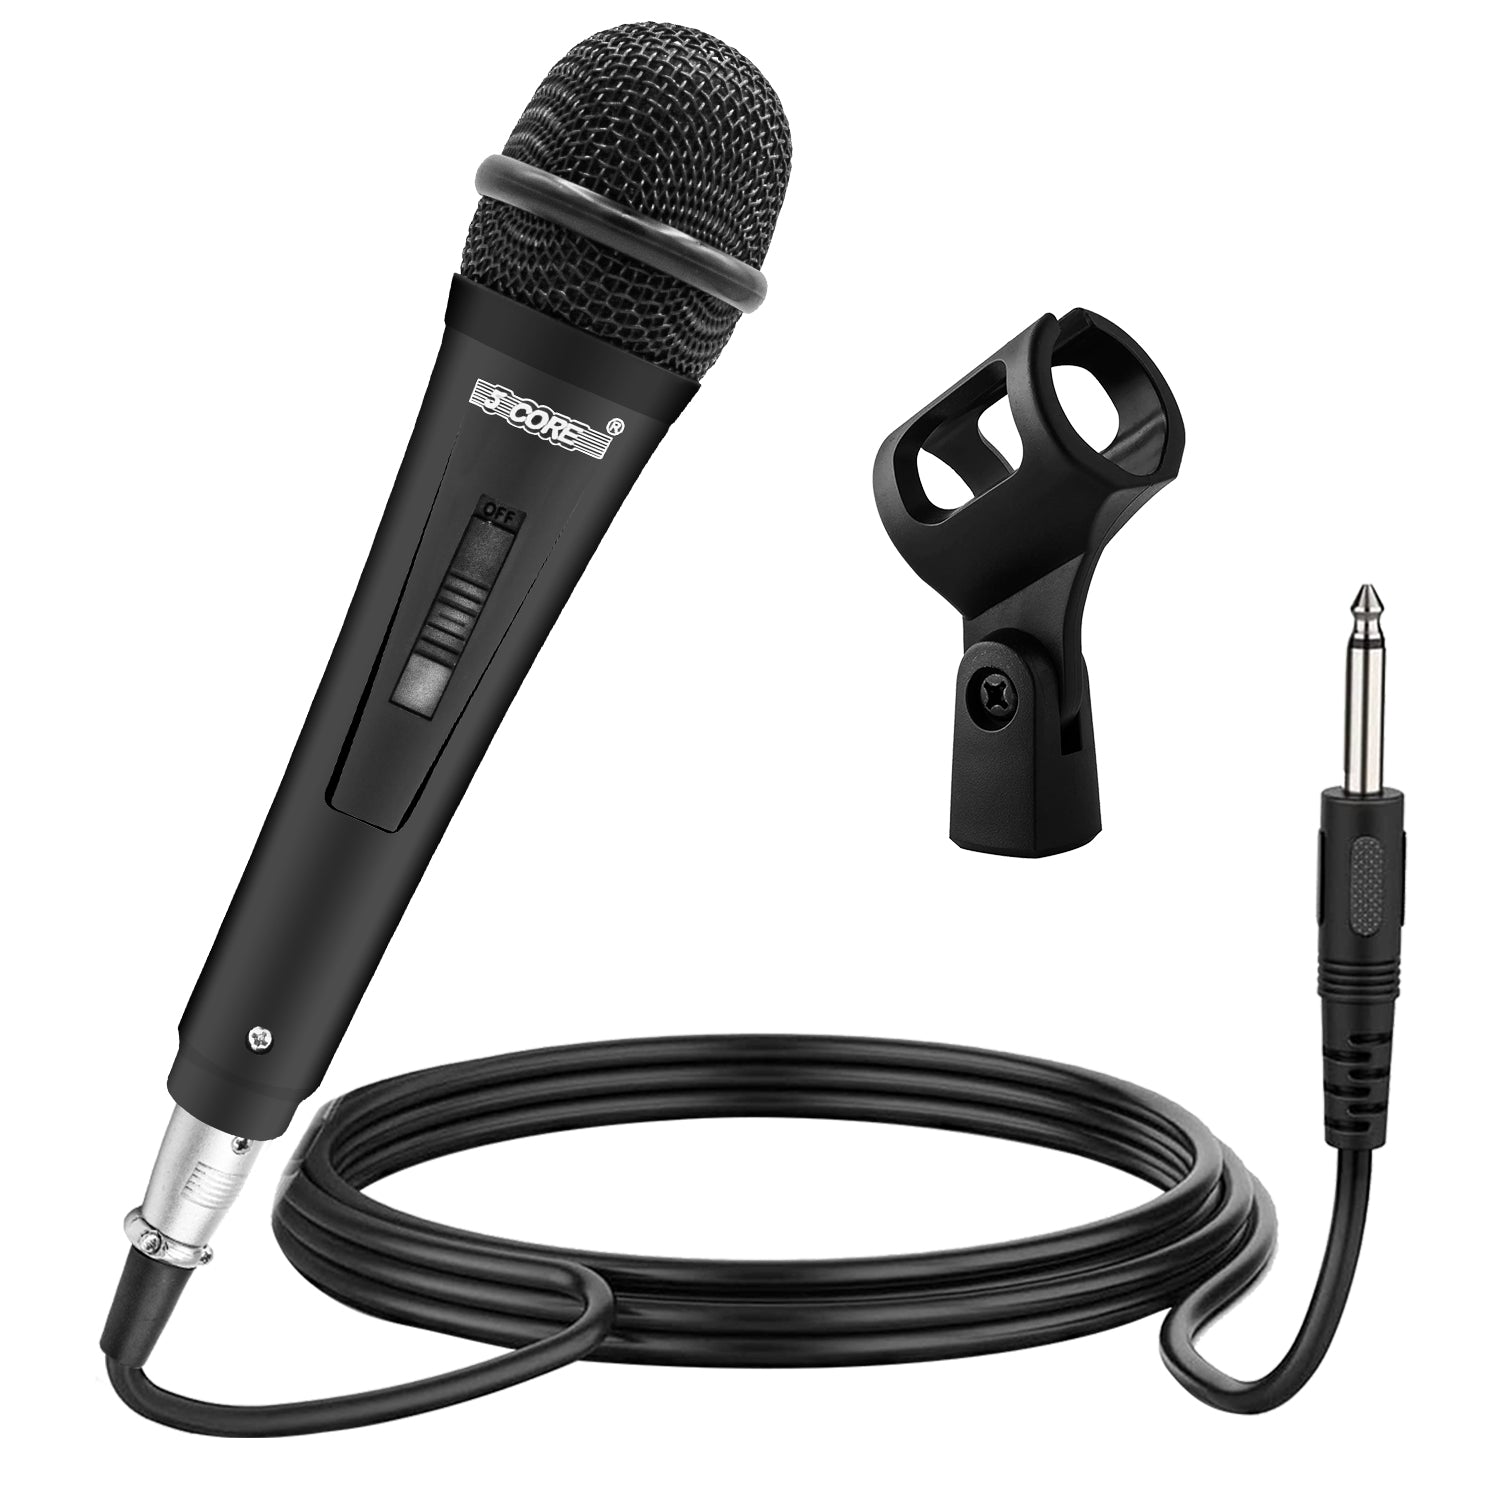 5 Core Karaoke Microphone Dynamic Vocal Handheld Mic Cardioid Unidirectional Microfono w On and Off Switch Includes XLR Audio Cable Mic Holder -PM 816